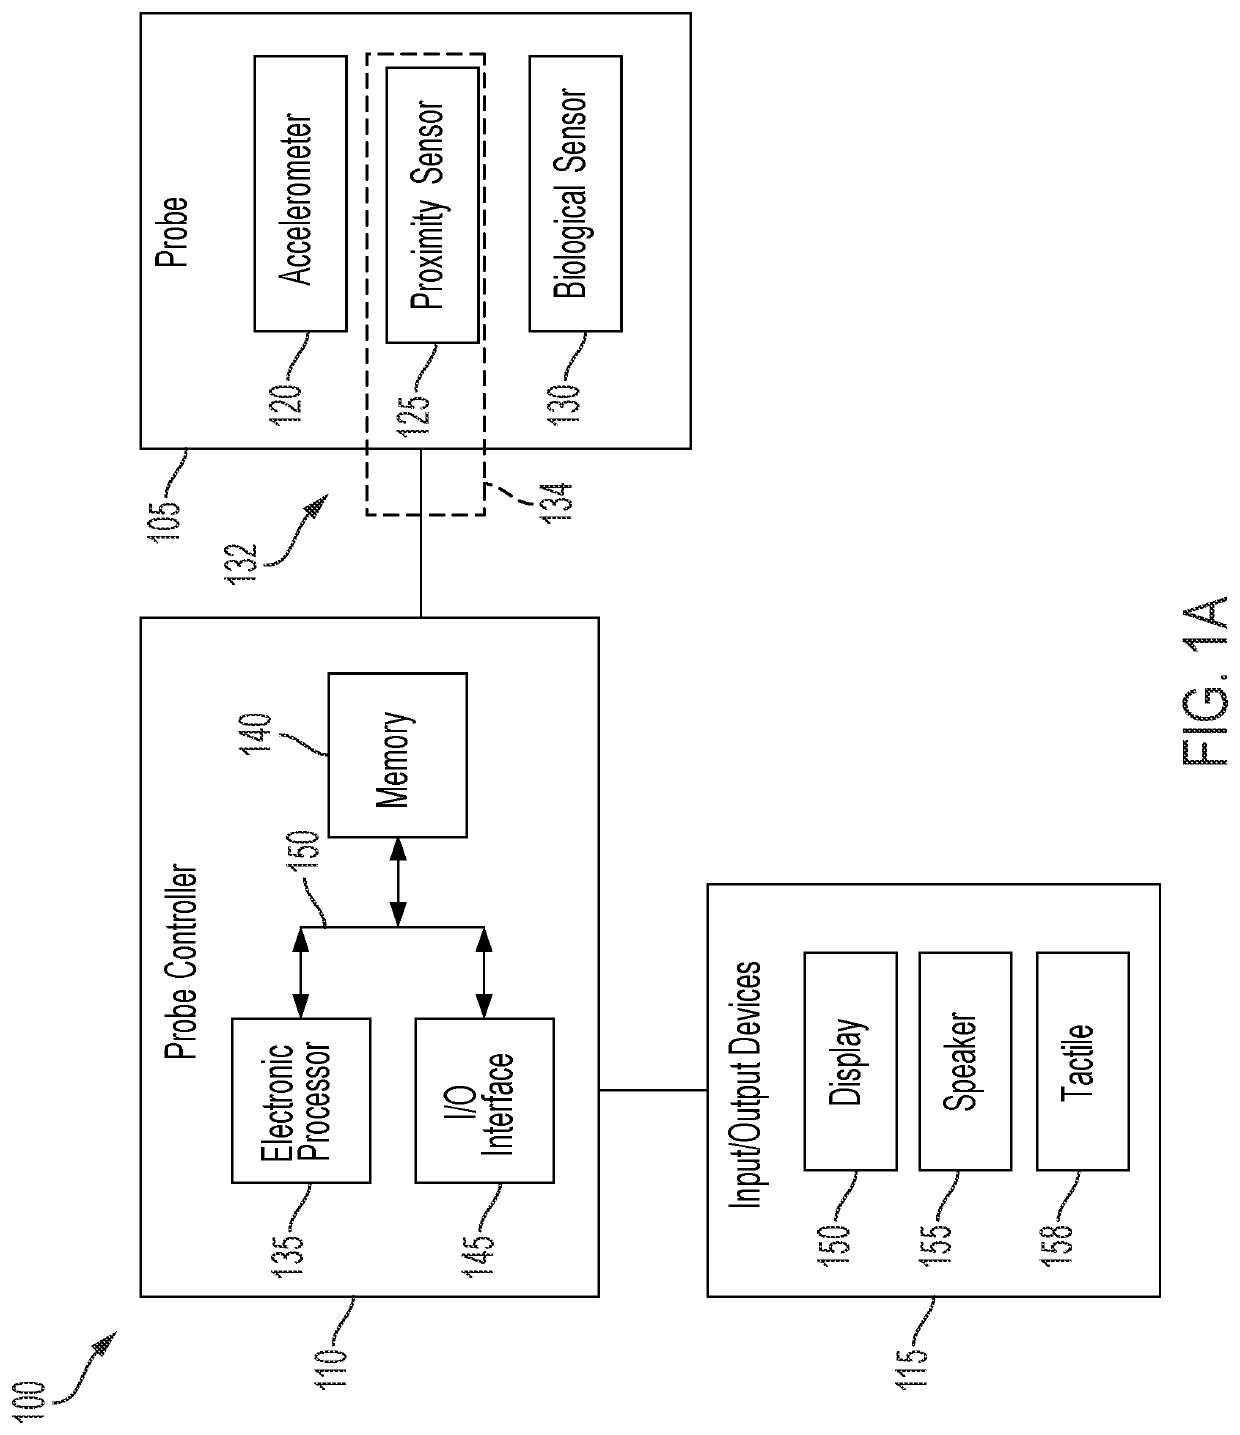 Proximity detection for assessing sensing probe attachment state